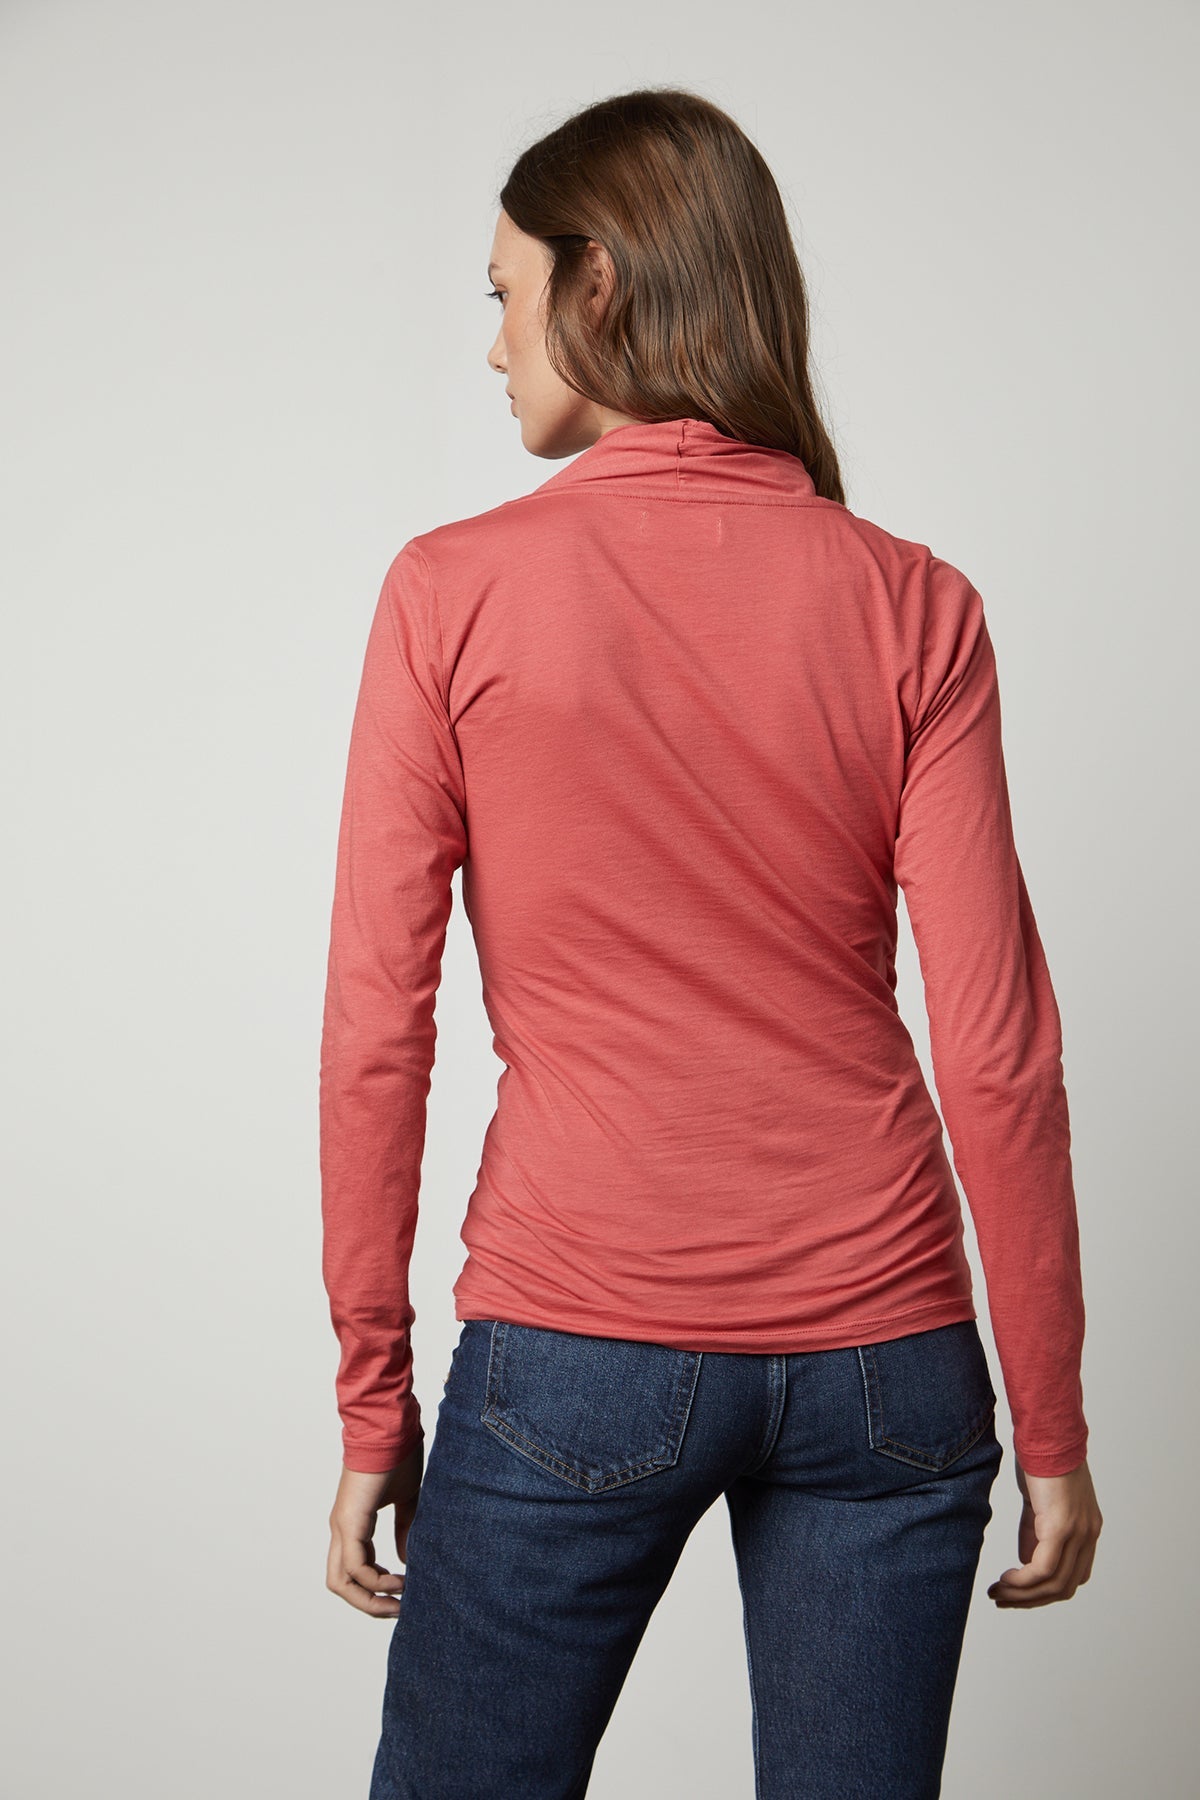 The back view of a woman wearing a Velvet by Graham & Spencer MERI WRAP FRONT FITTED TOP.-35567564456129